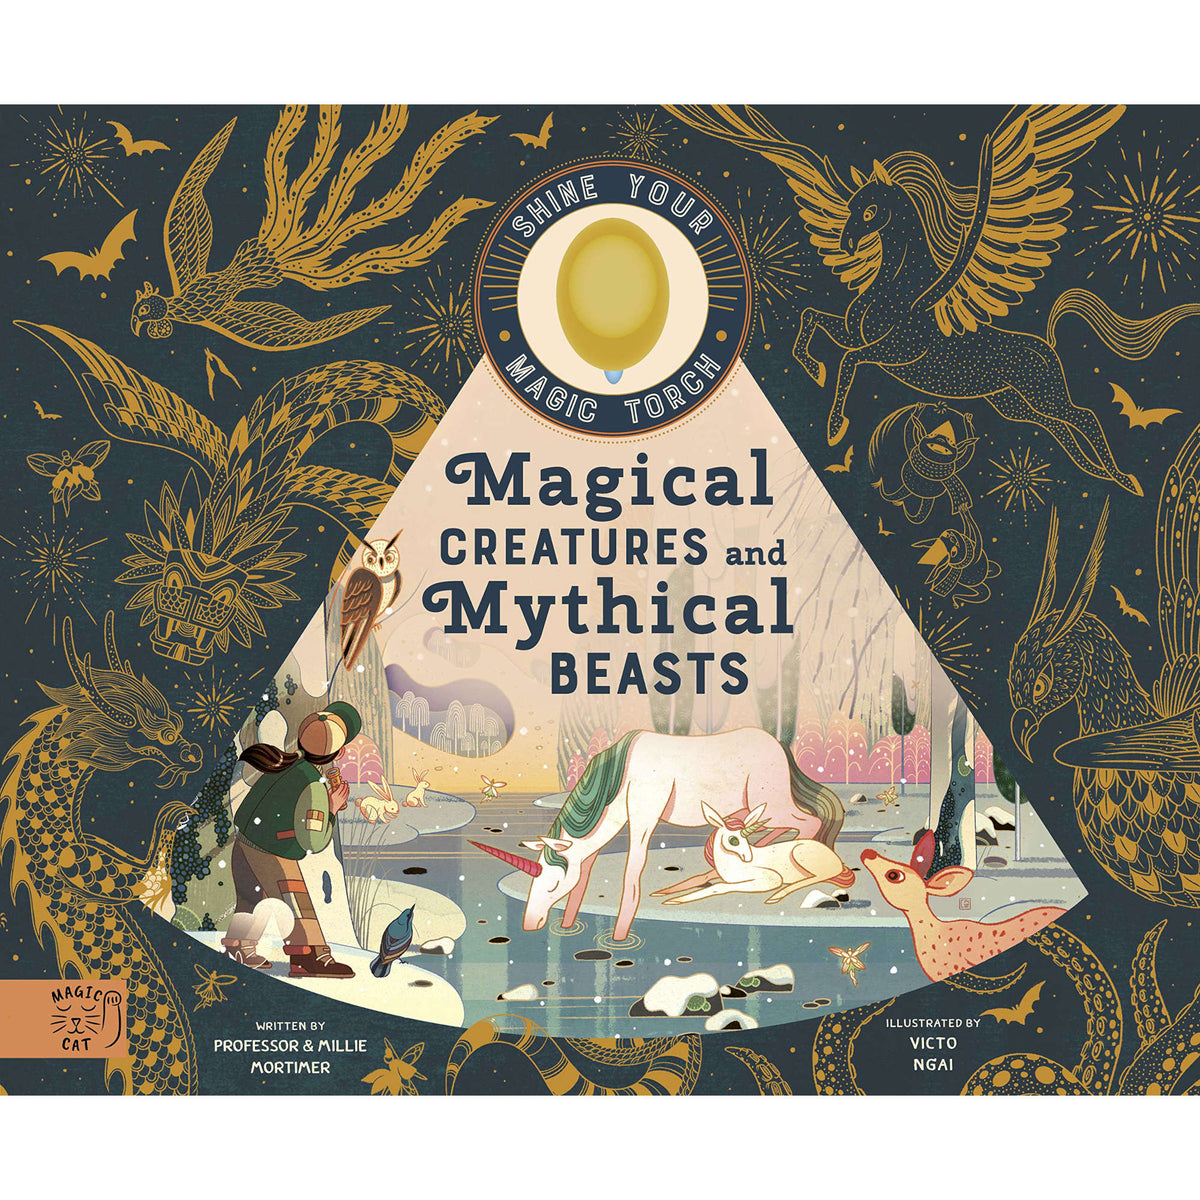 Magical Creatures and Mythical Beasts (Shine Your Magic Torch)